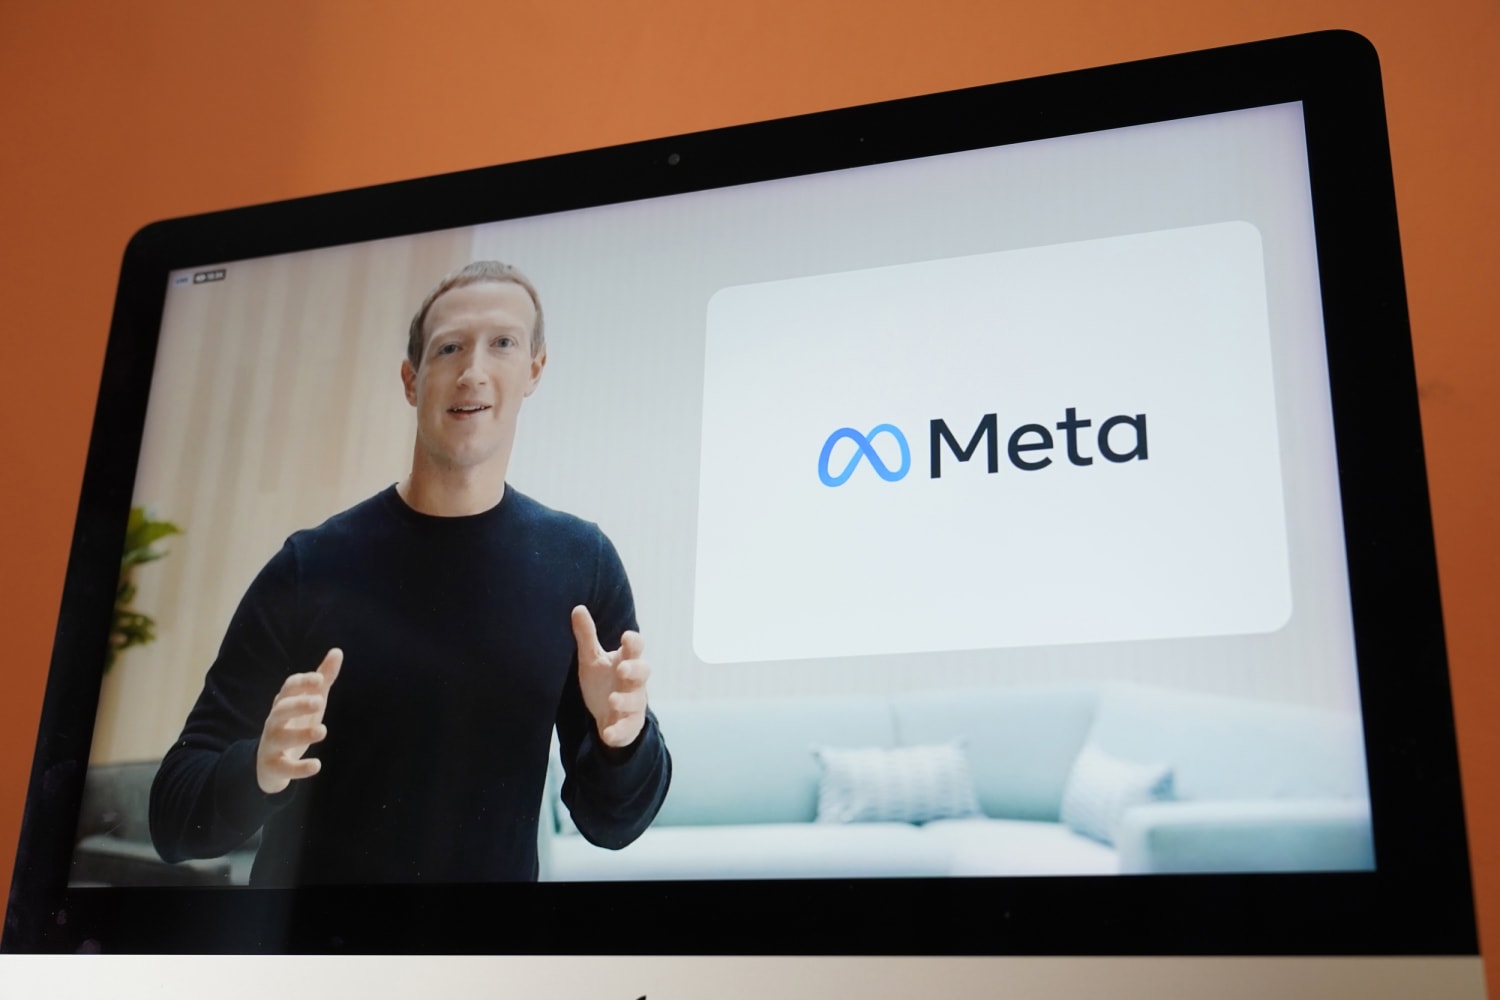 What Is The Metaverse And Why Is Facebook Betting On It?